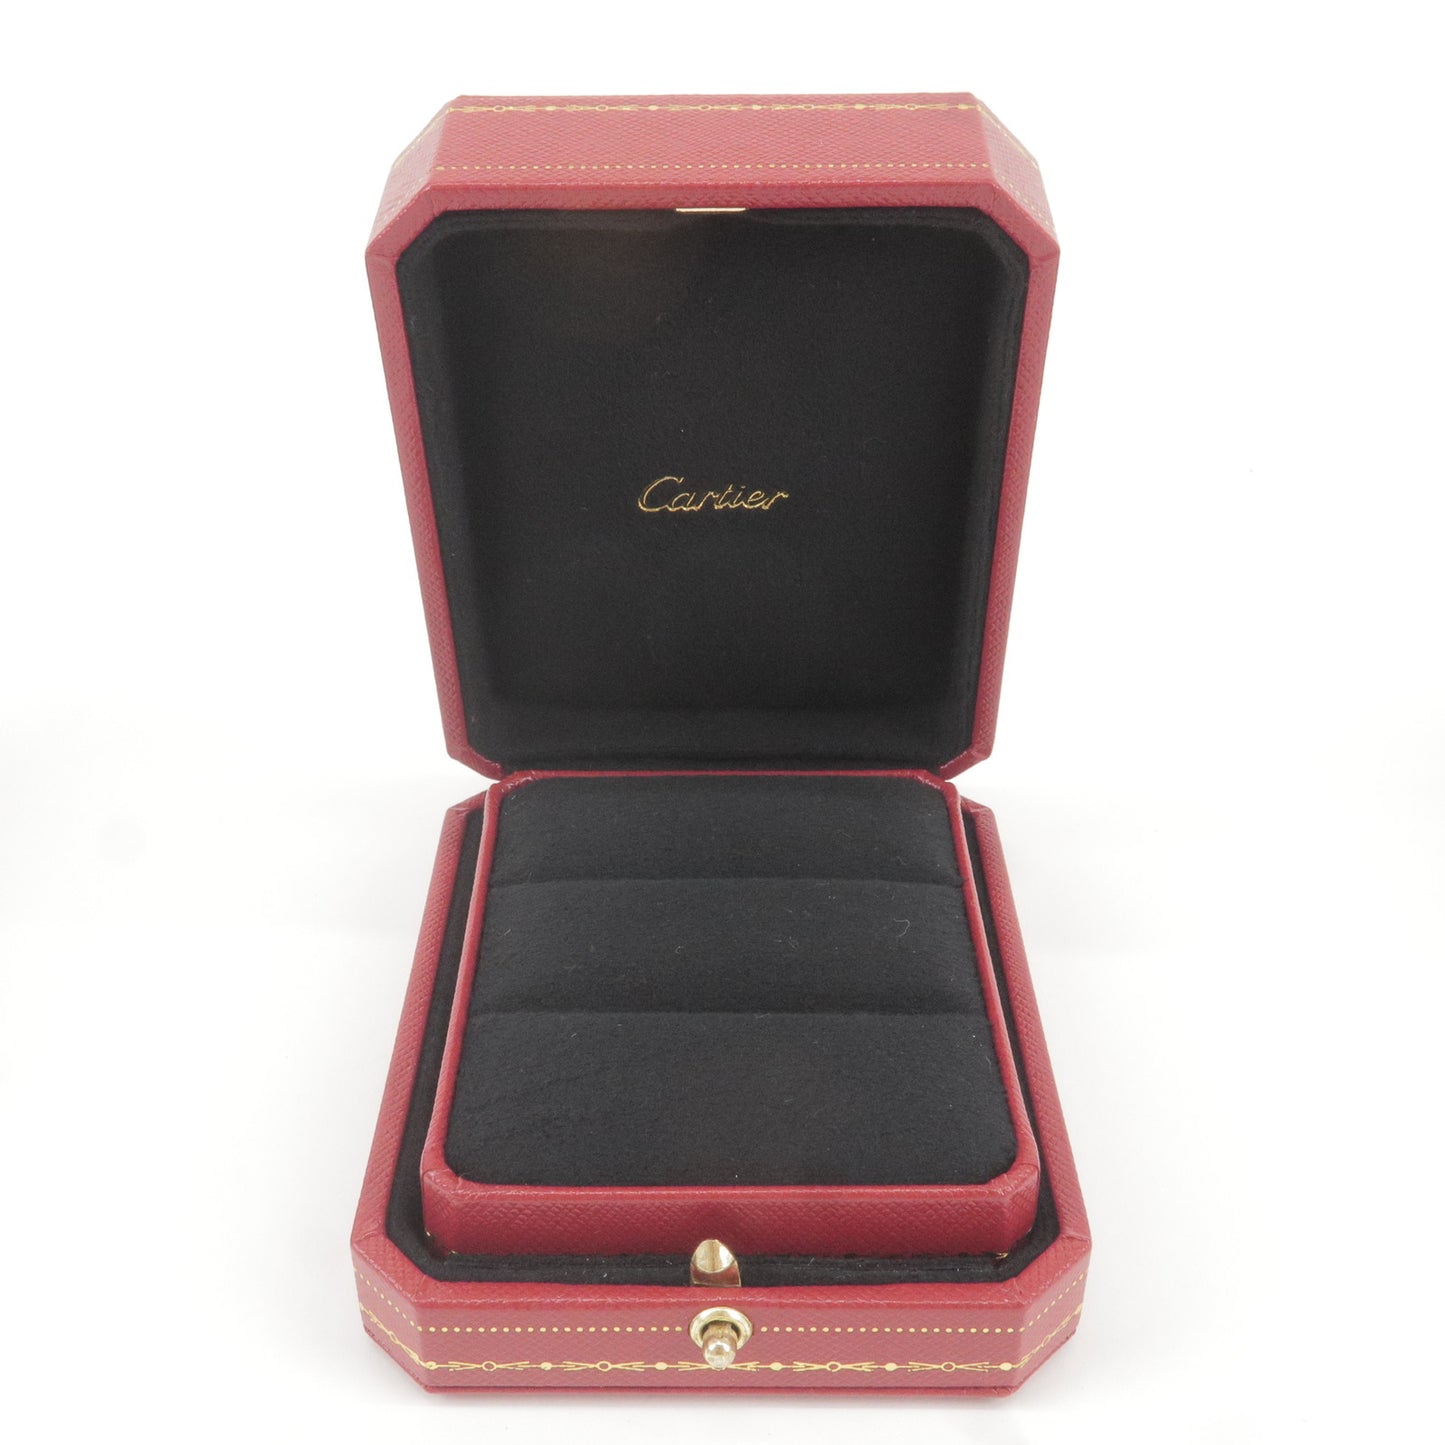 Cartier Set of 2 Pair Ring Box Jewelry Box For Pair Rings Red